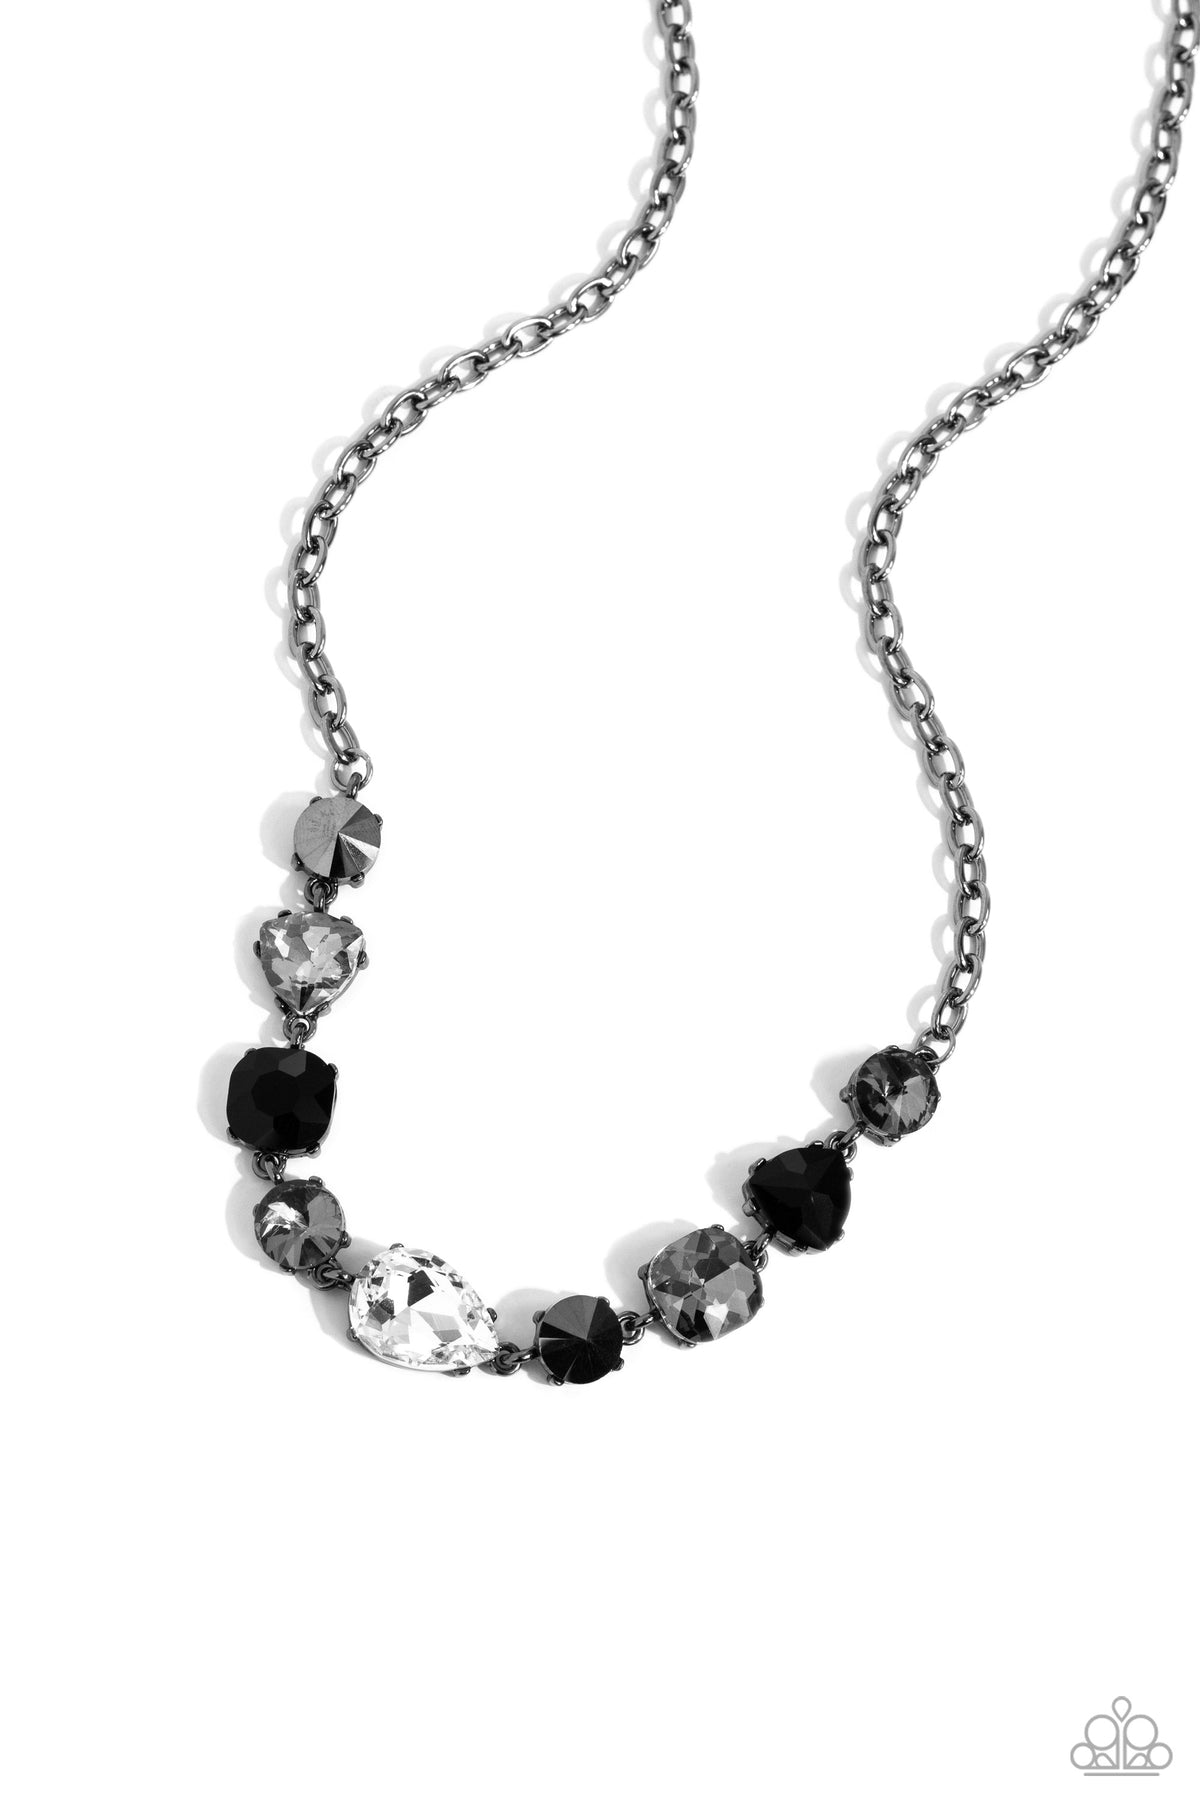 Emphatic Edge Black &amp; White Gem Necklace - Paparazzi Accessories- lightbox - CarasShop.com - $5 Jewelry by Cara Jewels